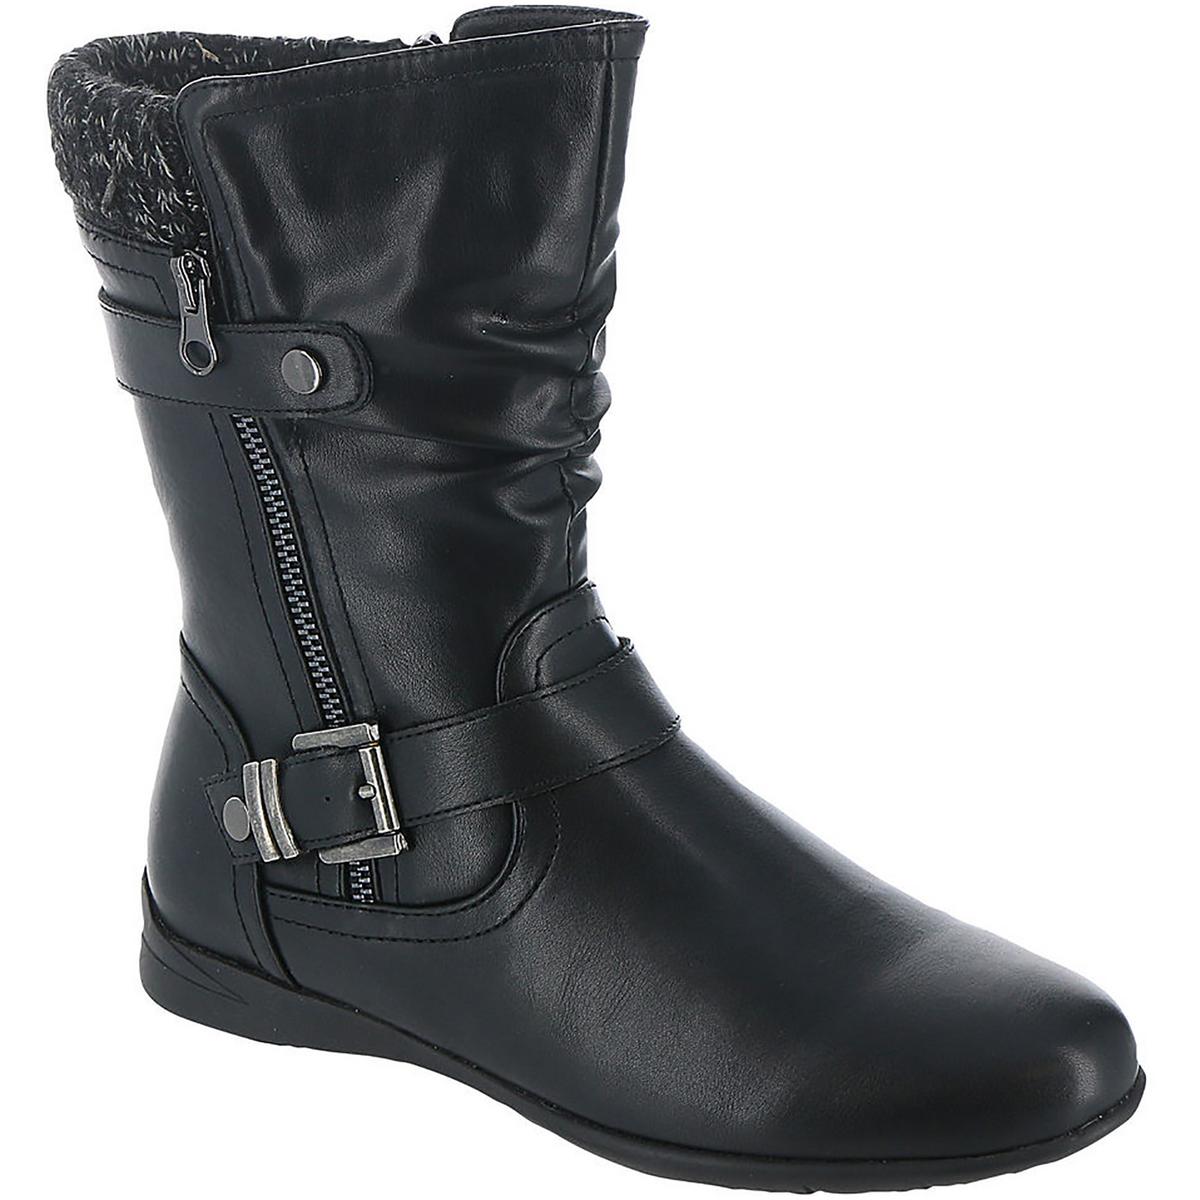 Wanderlust Phyllis Womens Faux Leather Zip Up Mid-Calf Boots